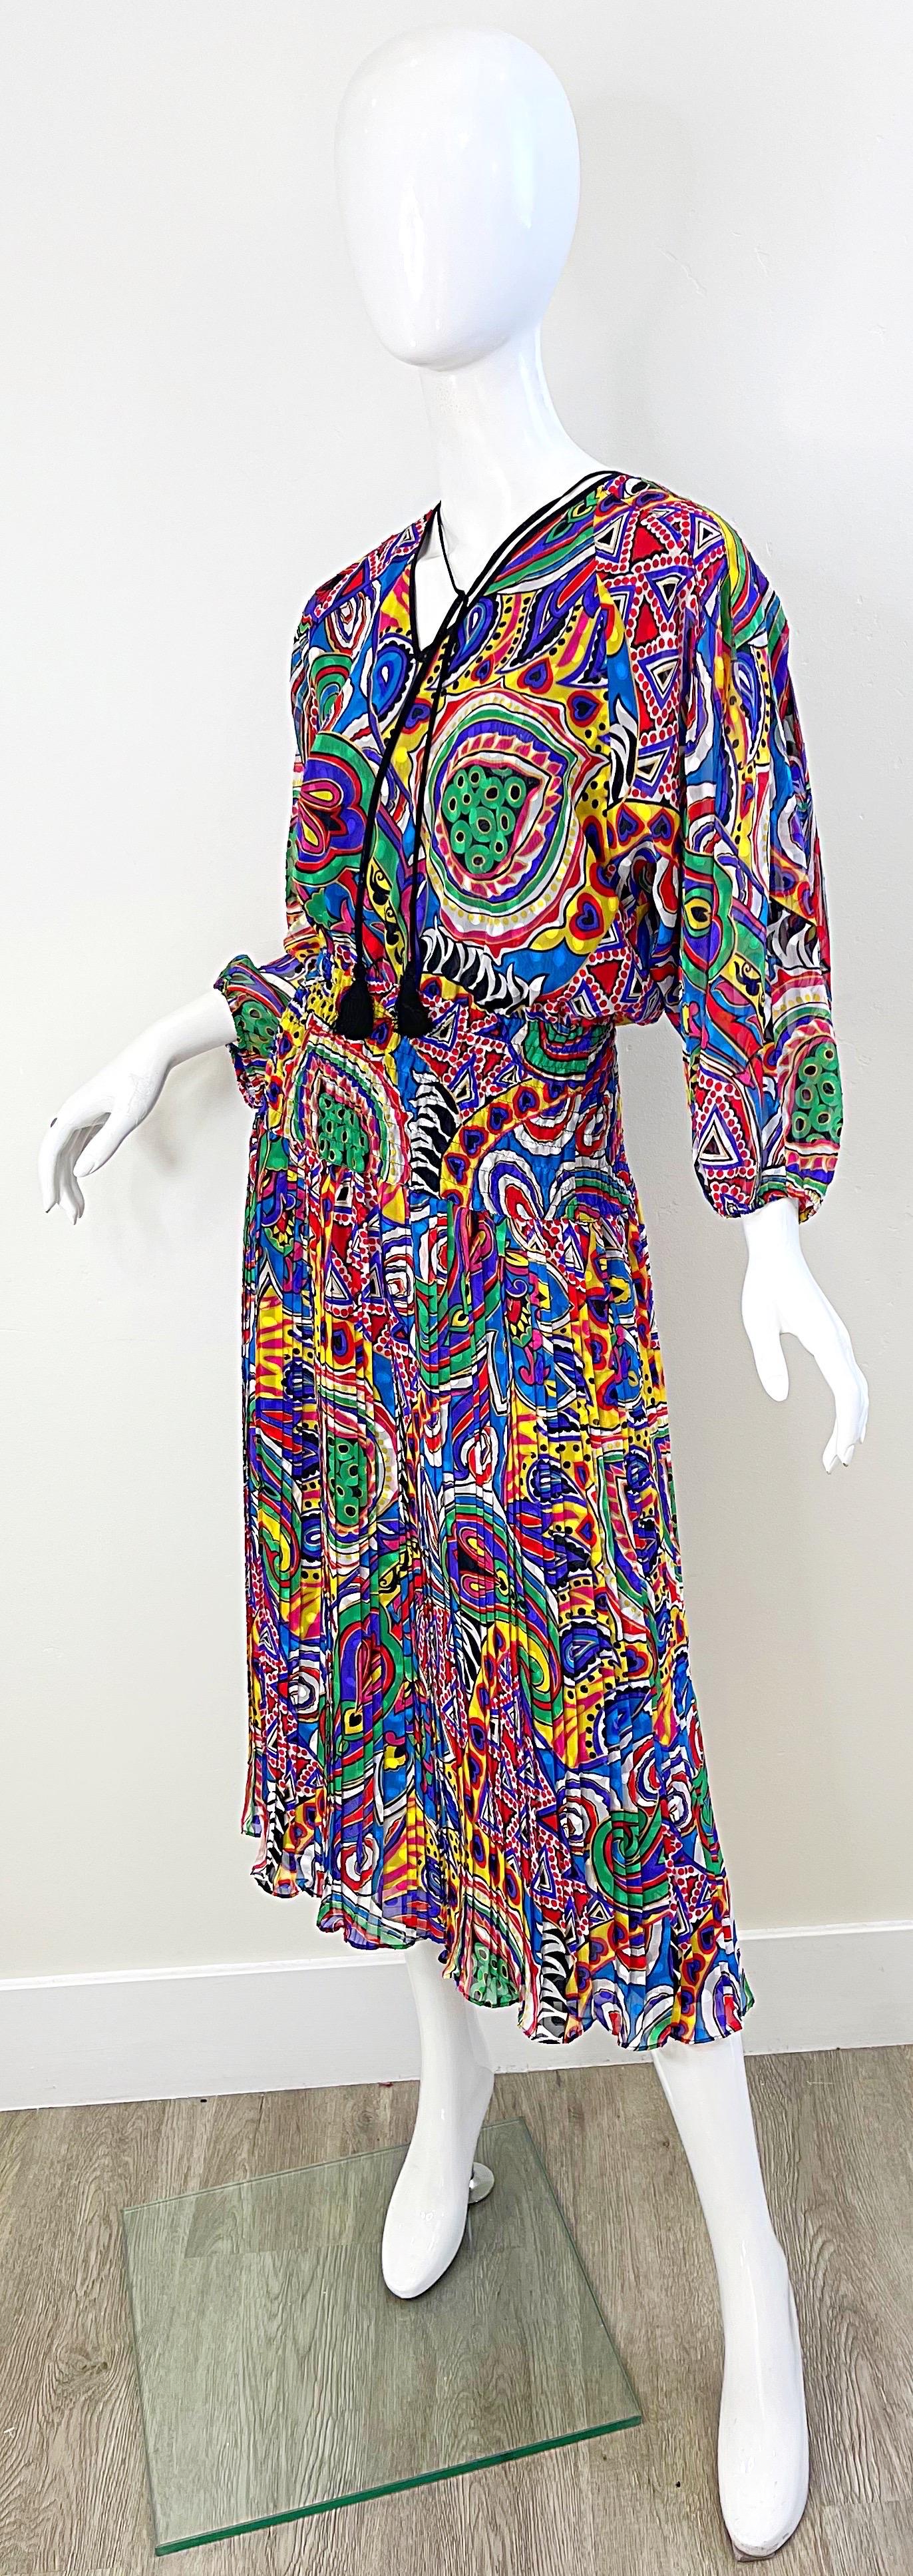 Diane Freis 1980s Novelty Heart Paisley Psychedelic Print Vintage 80s Dress For Sale 5